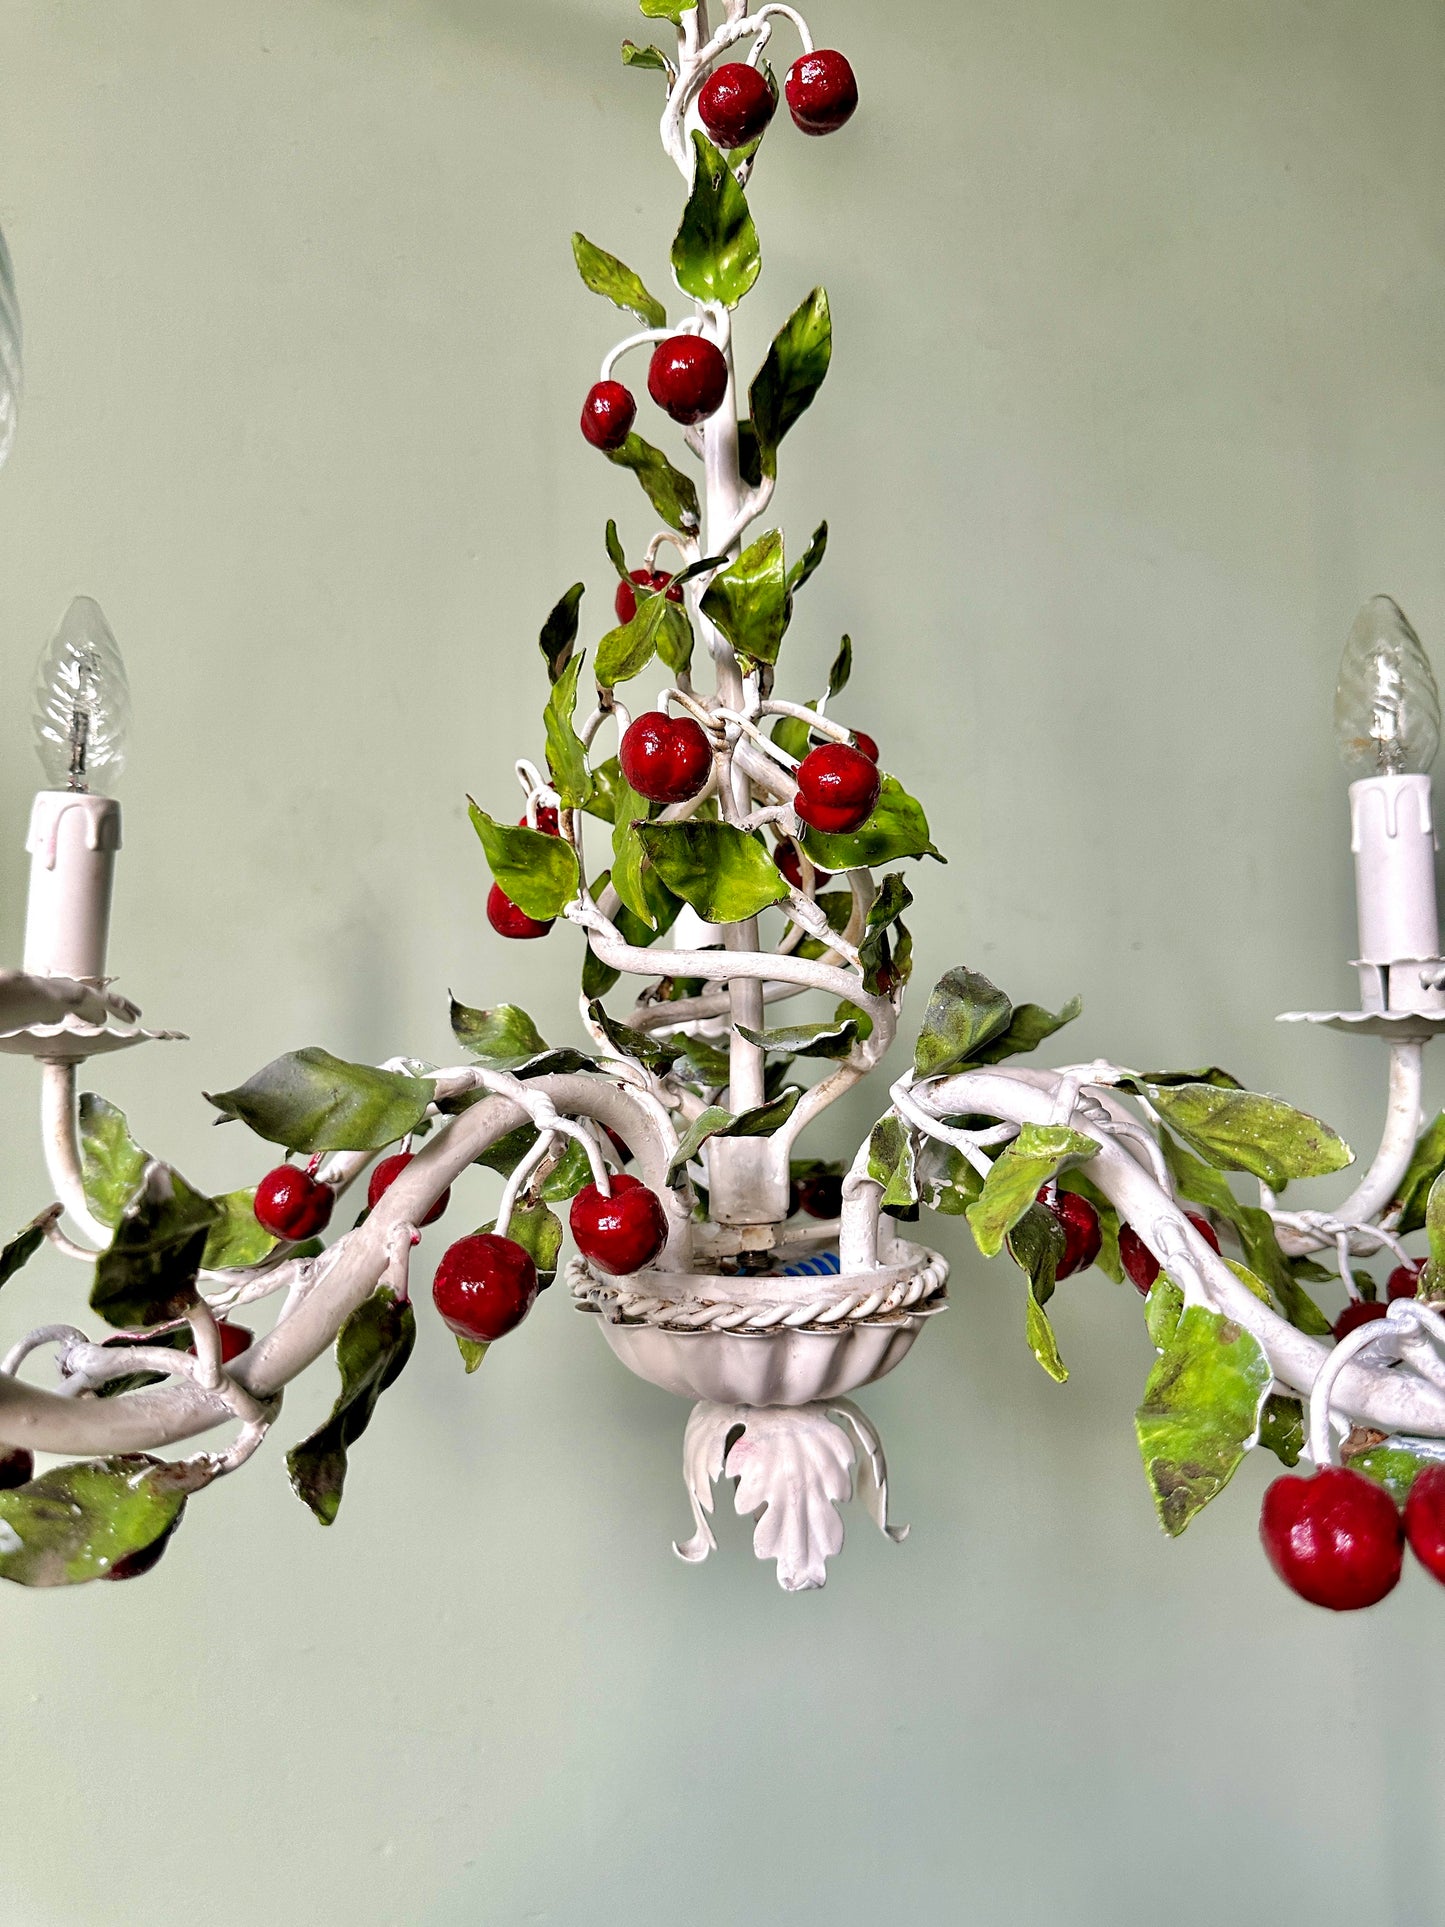 1940s Italian Cherry Tole Chandelier (2 of 2 Available)